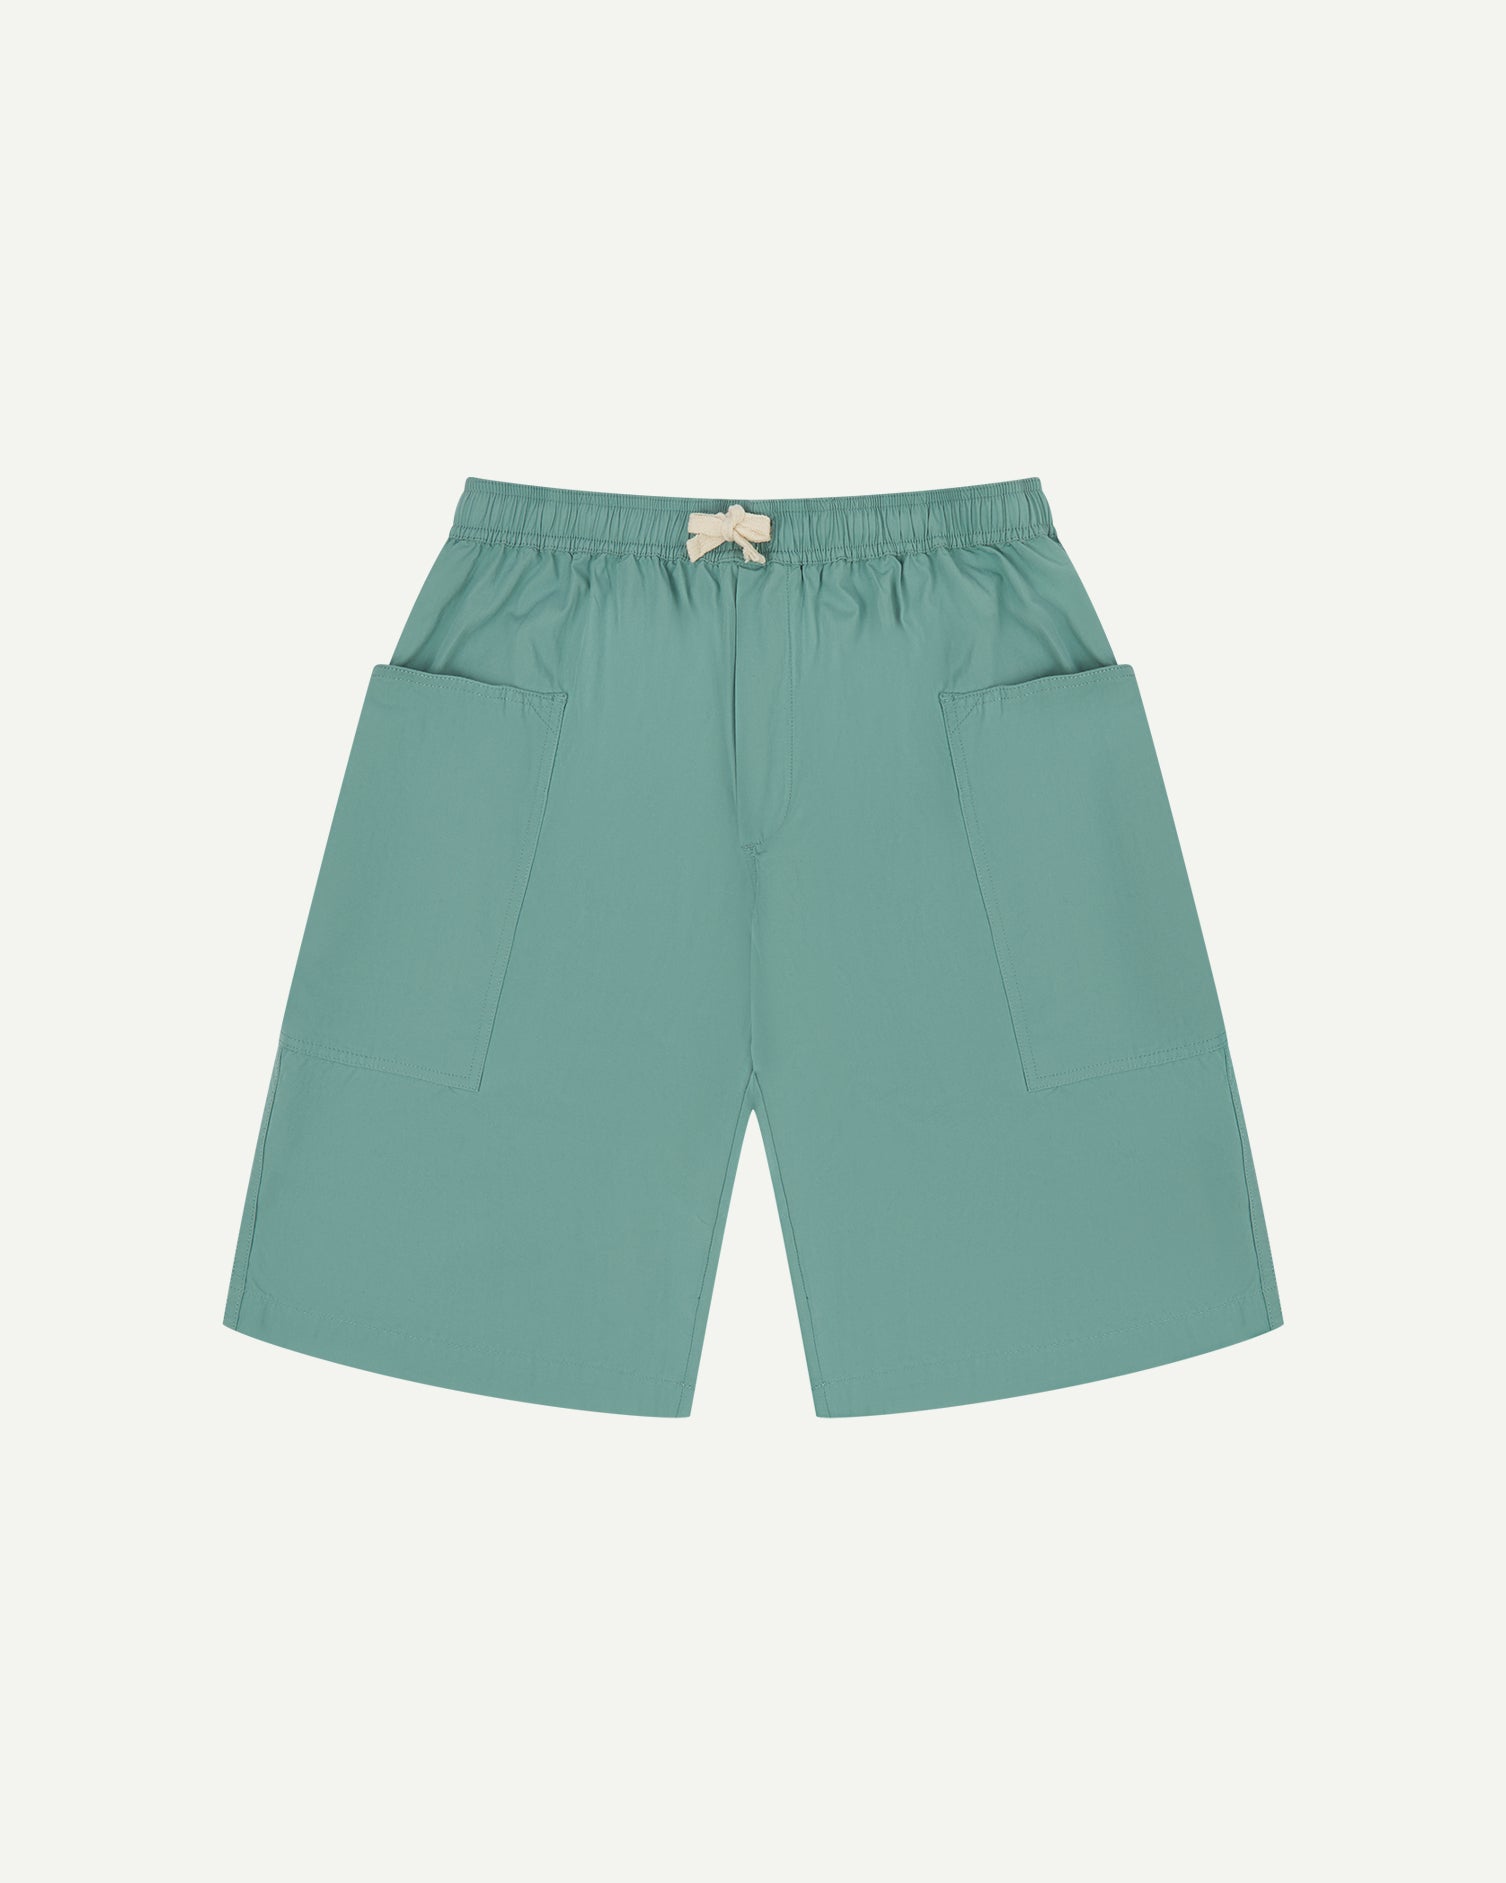 Front view of eucalyptus green organic cotton #5015 lightweight cotton shorts by Uskees. Clear view of elasticated waist and deep front pockets.